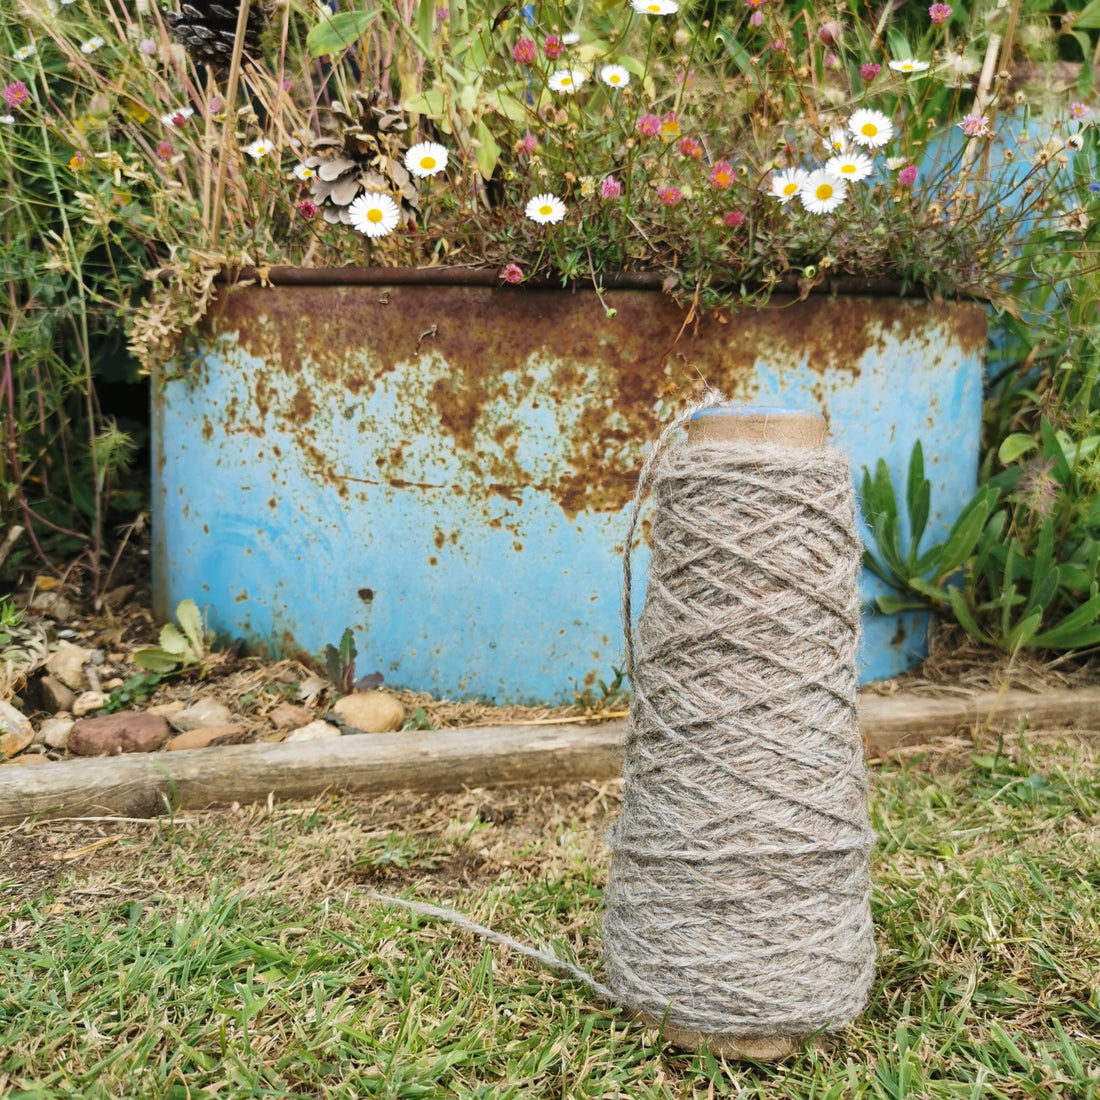 Human Hair Wool: A Sustainable Alternative in the Textile Industry